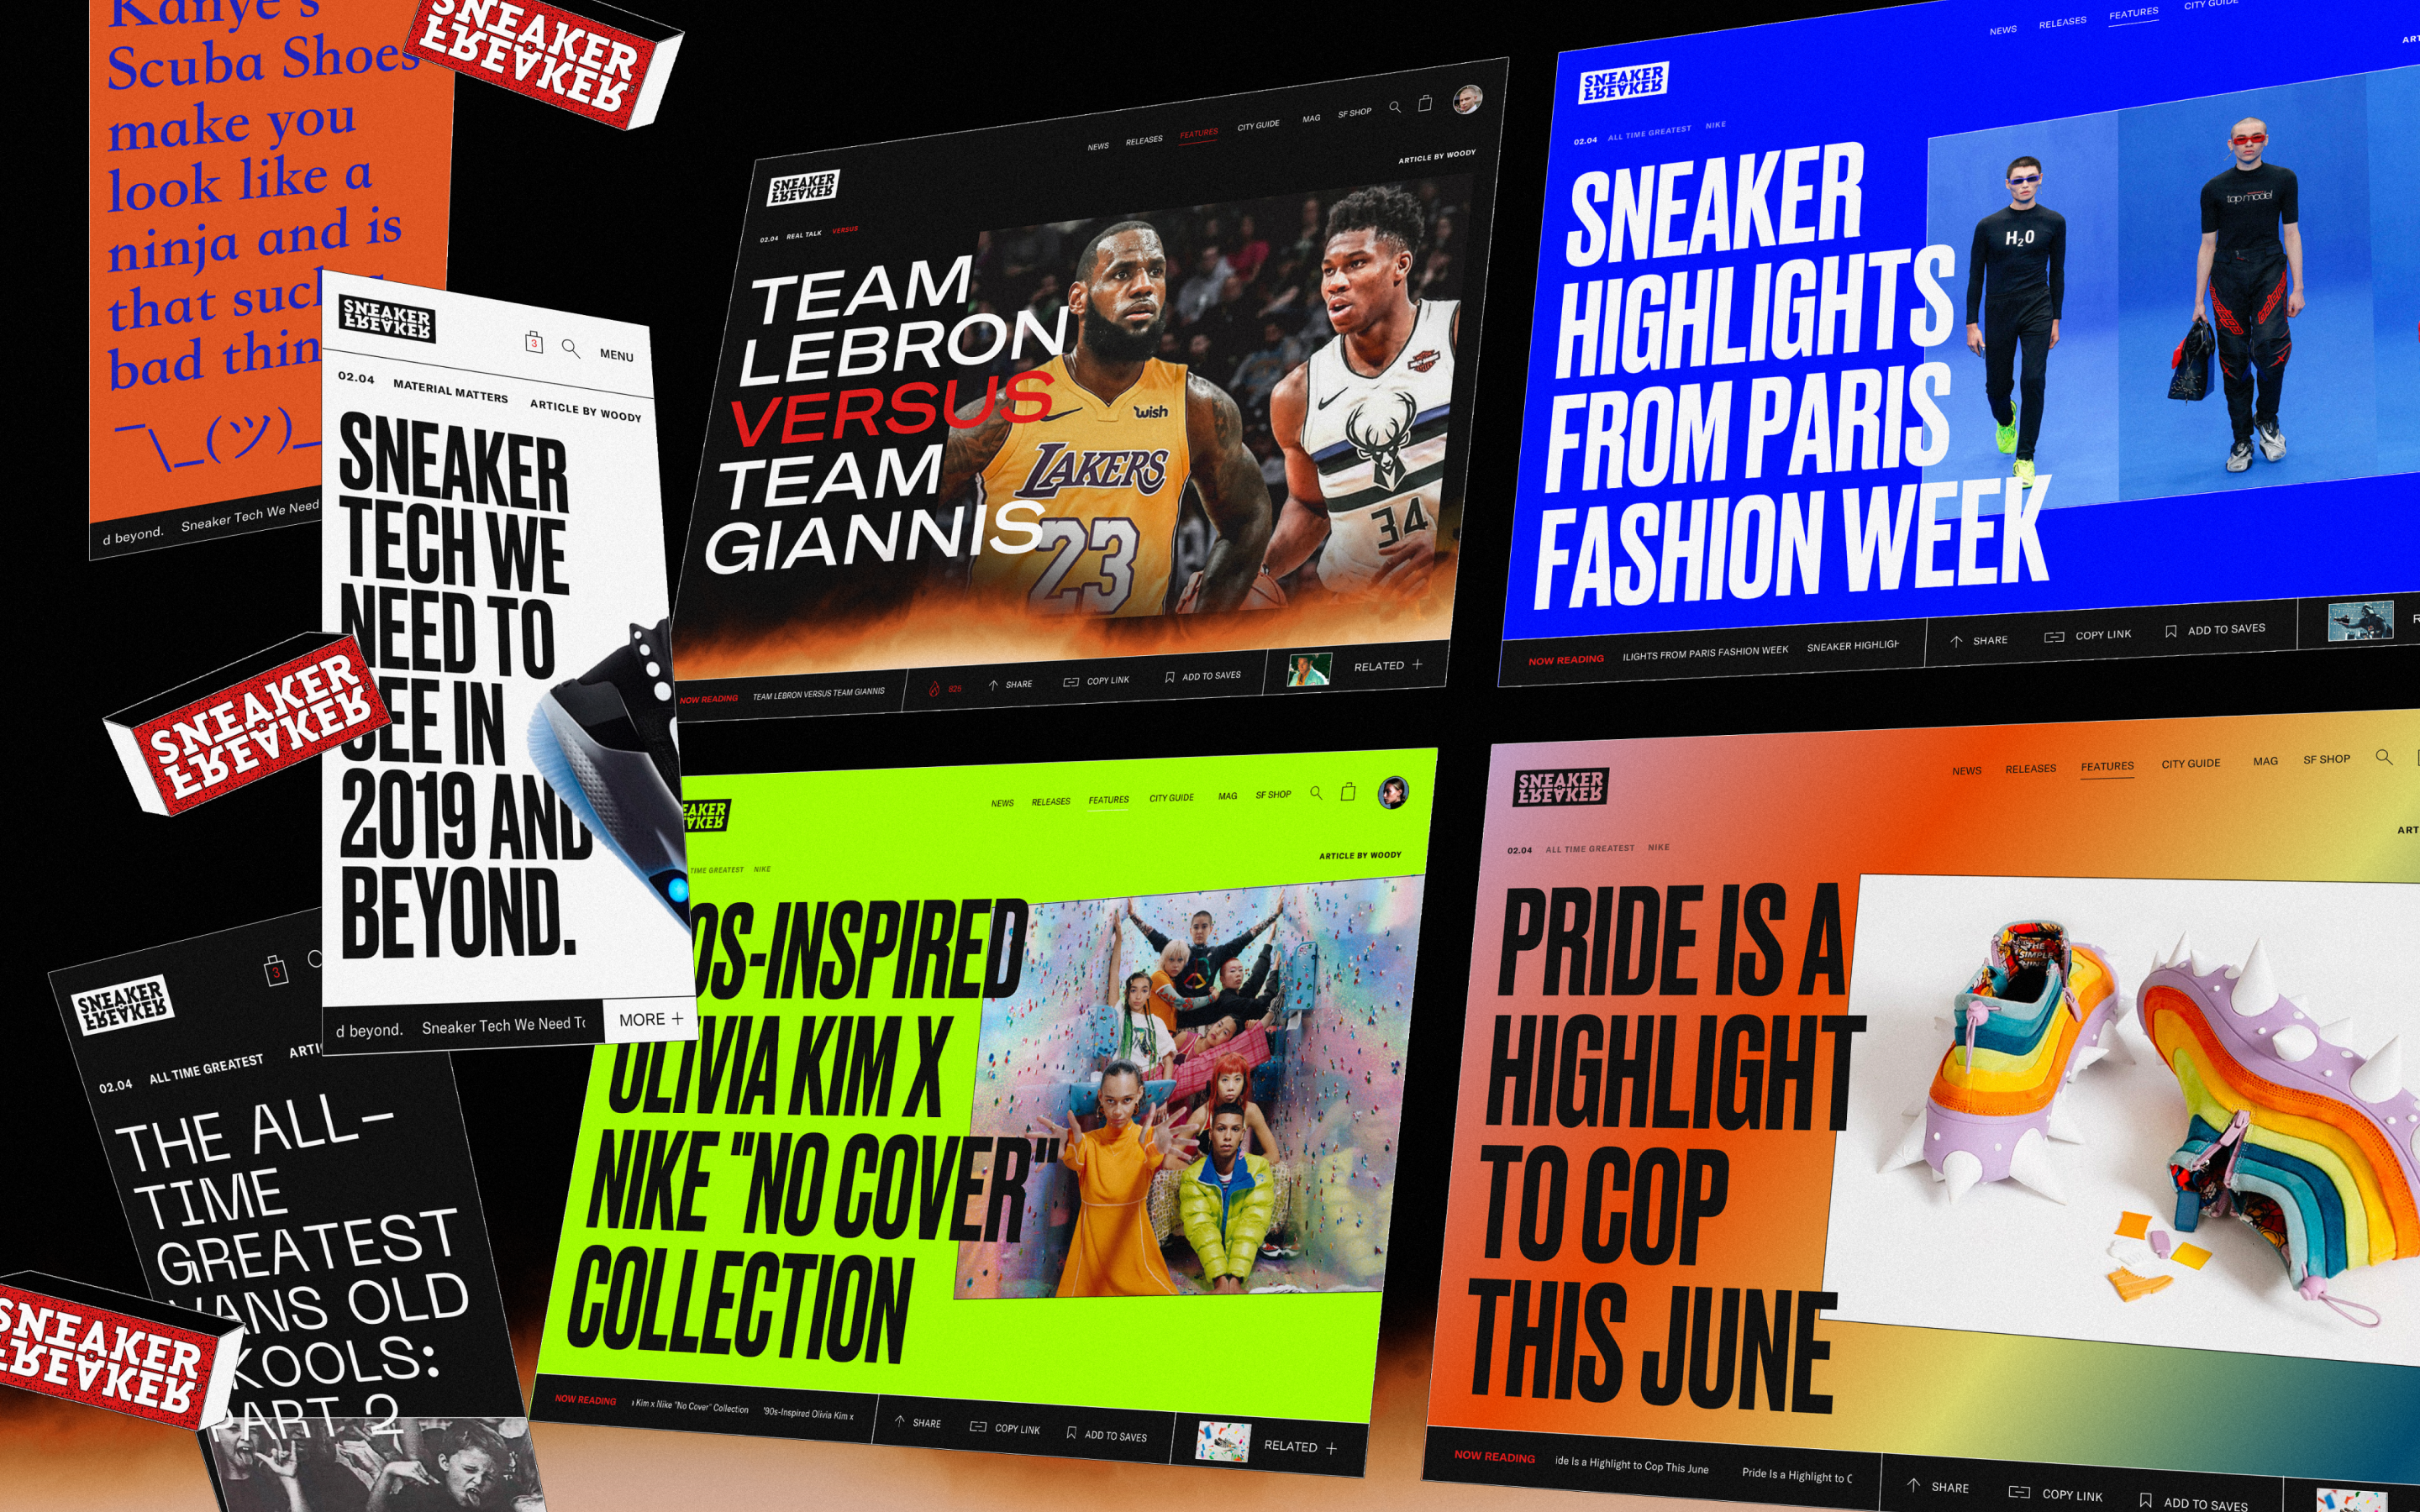 Multiple sneakerfreaker.com screens and website images overlaid on one another